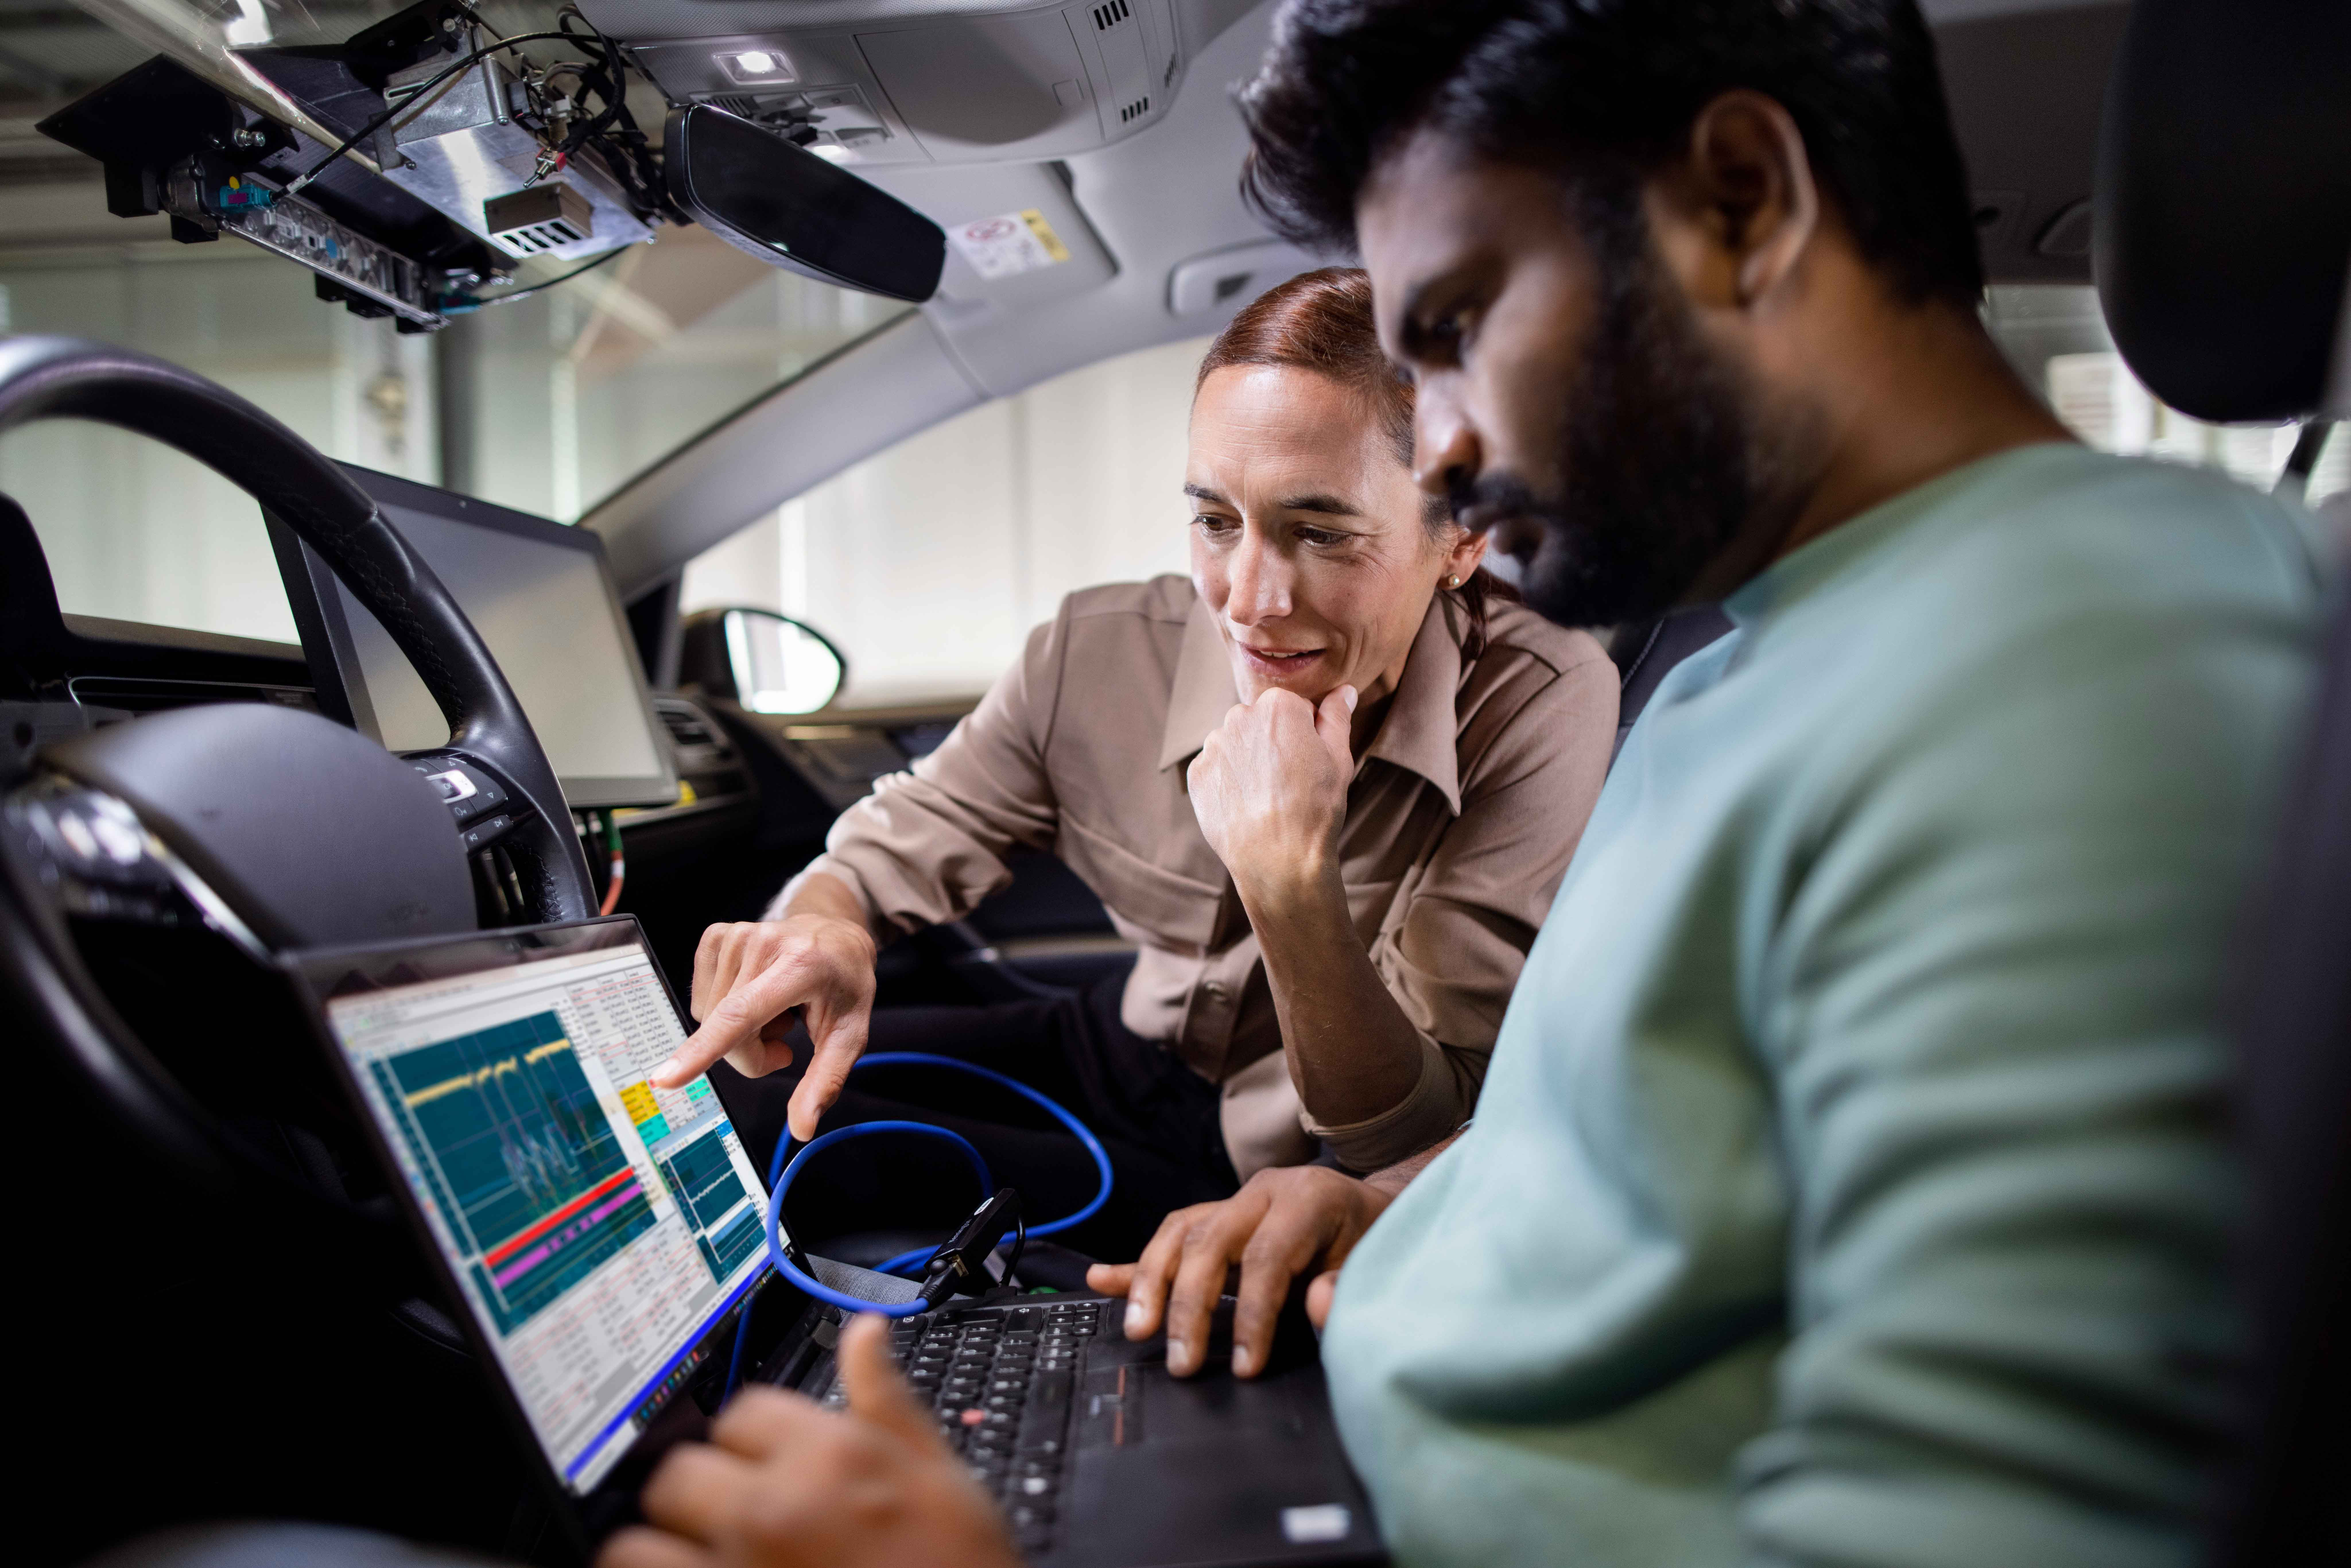 IAA Mobility 2023: Bosch is growing with solutions and technology for the software-defined vehicle